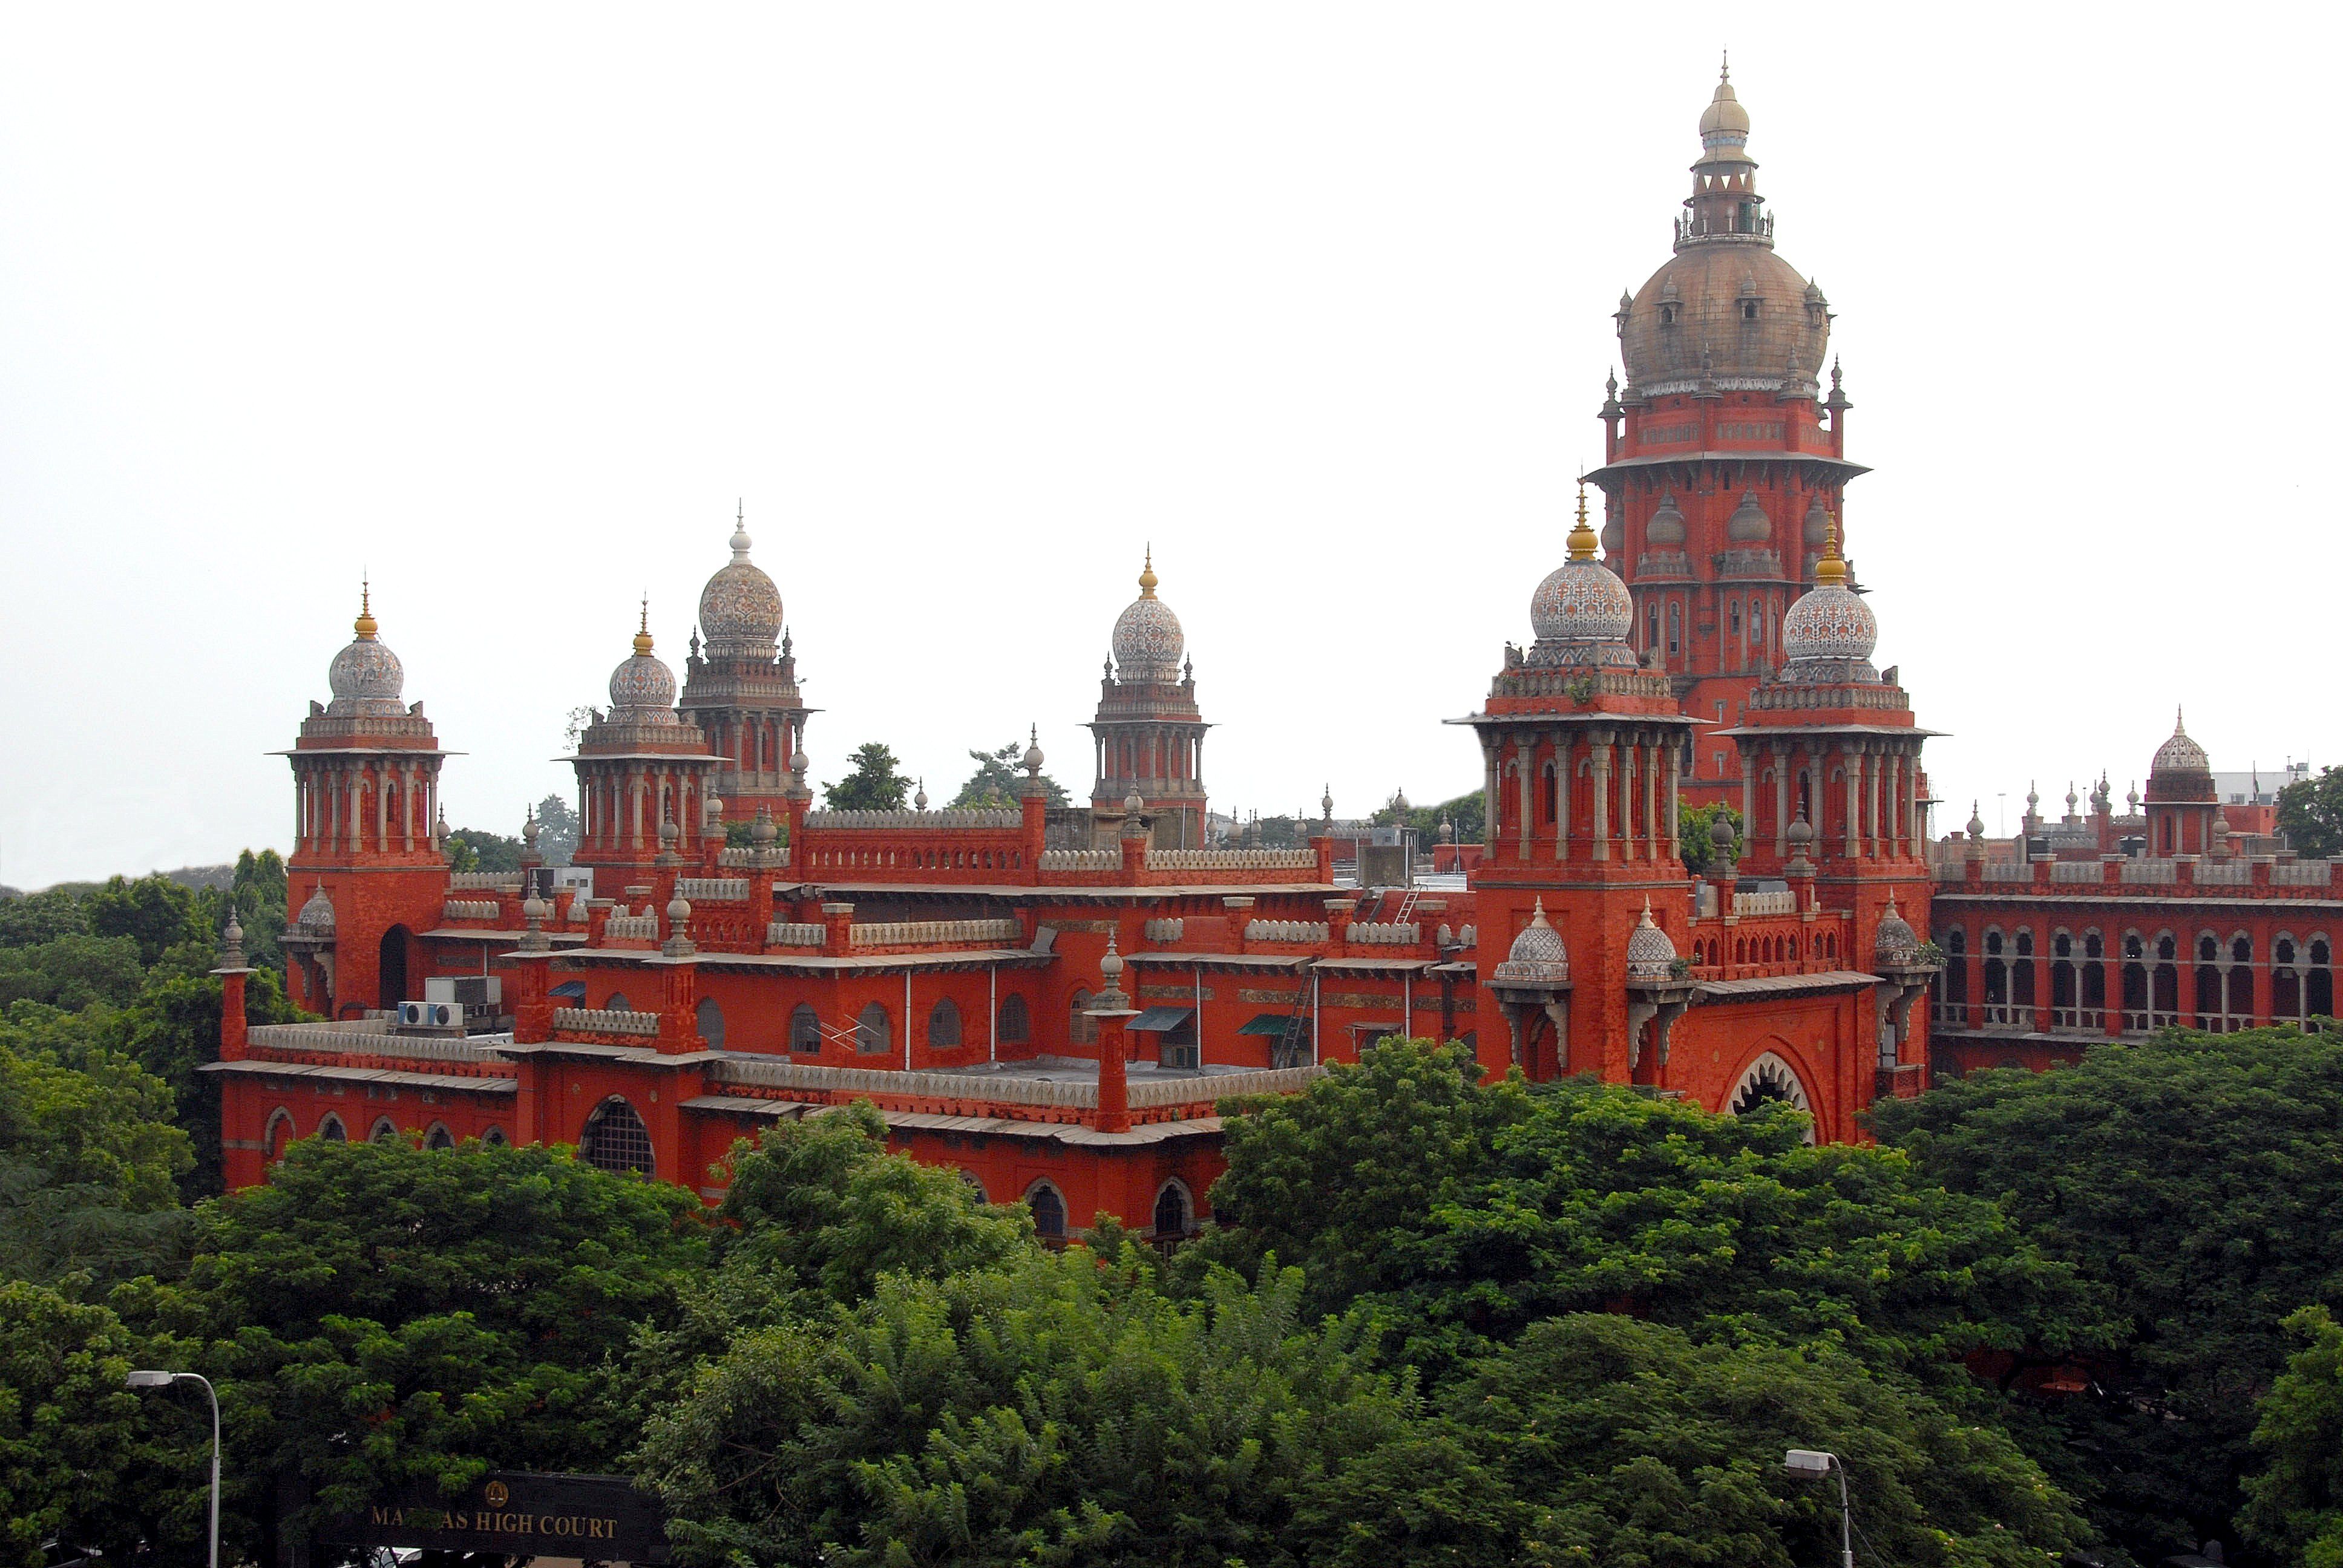 Election advertisement case: Madras High Court questions the Election Commission